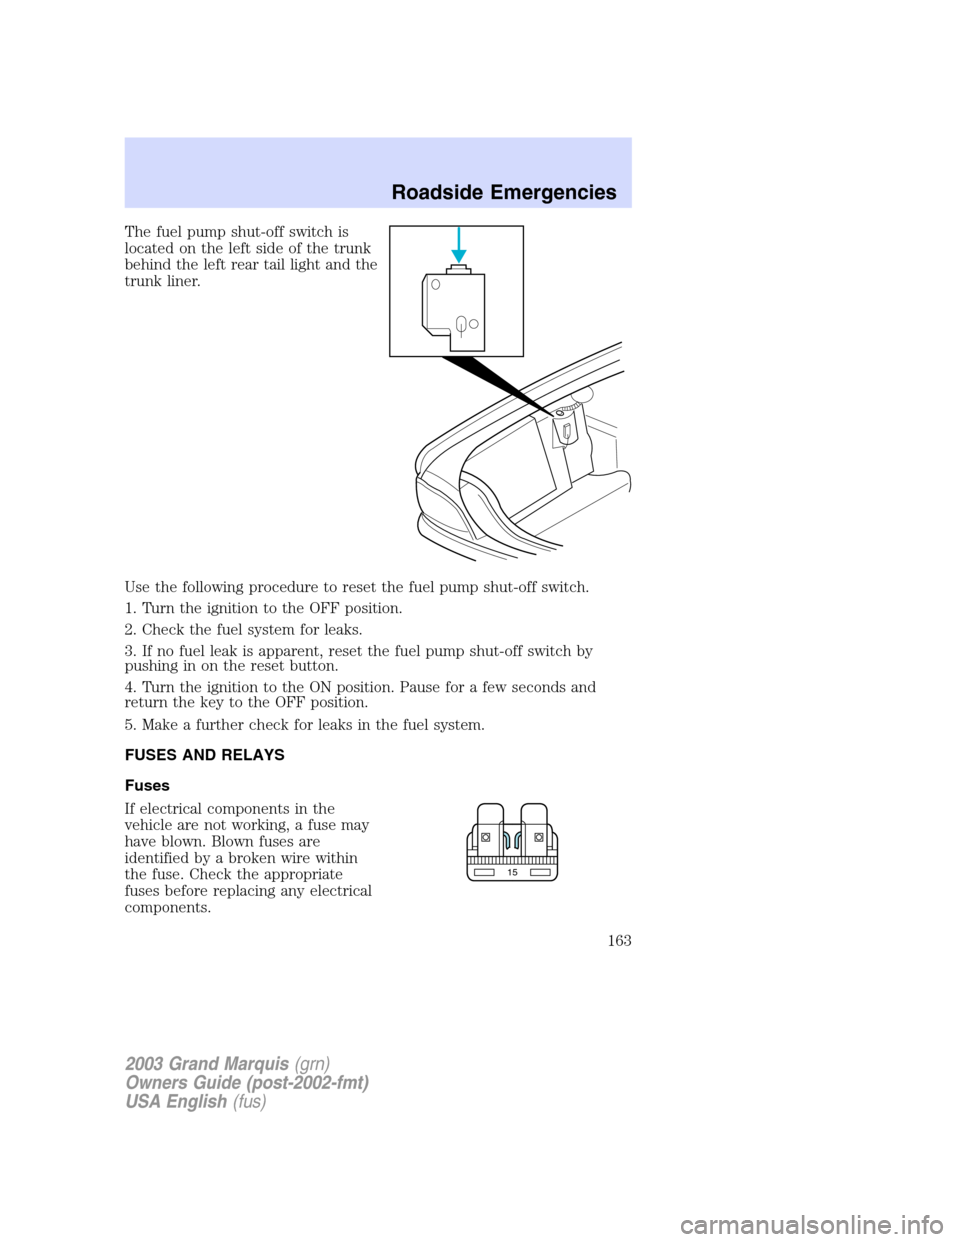 Mercury Grand Marquis 2003  Owners Manuals The fuel pump shut-off switch is
located on the left side of the trunk
behind the left rear tail light and the
trunk liner.
Use the following procedure to reset the fuel pump shut-off switch.
1. Turn 